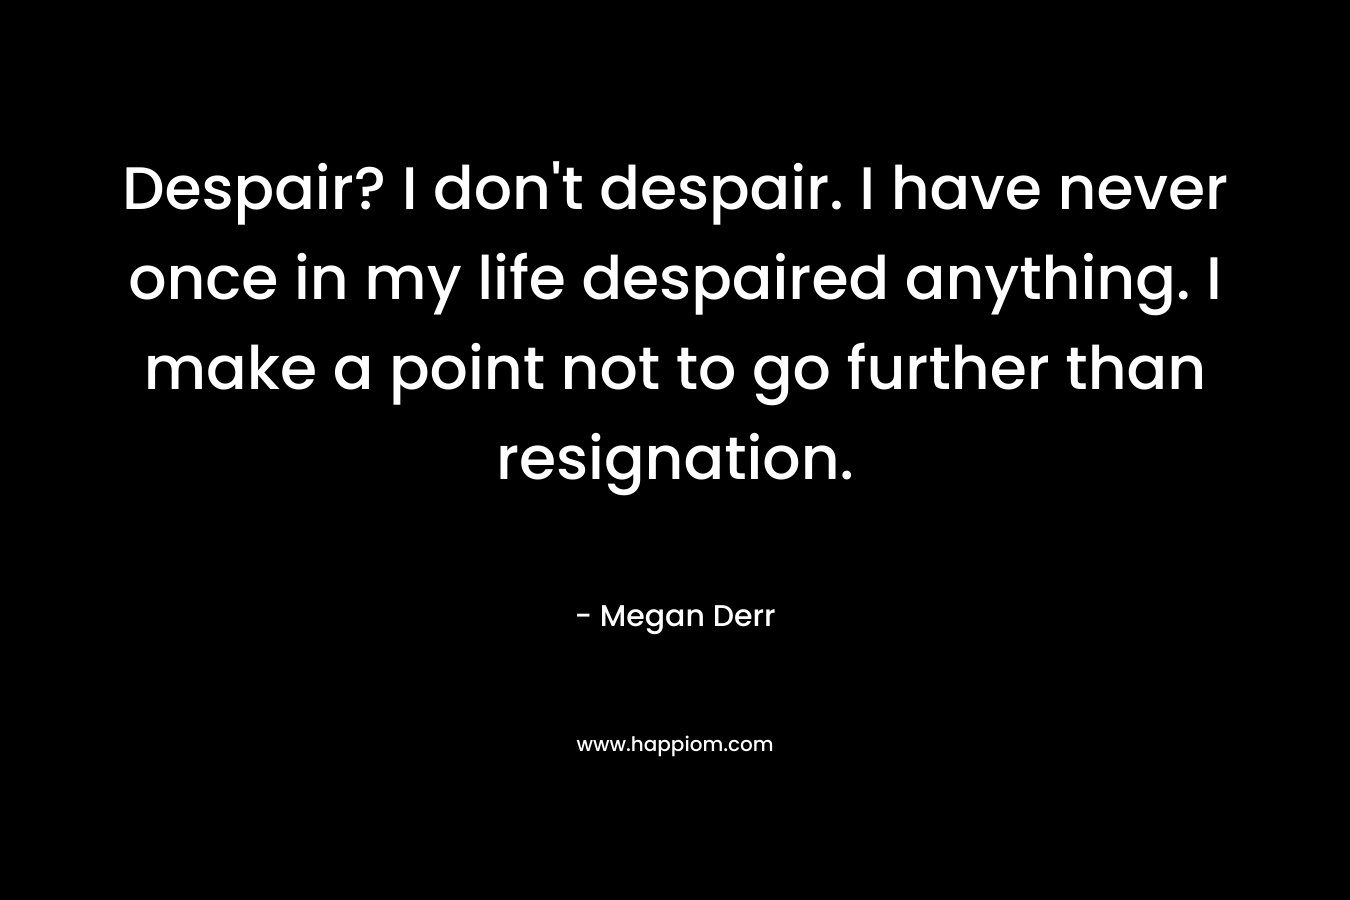 Despair? I don't despair. I have never once in my life despaired anything. I make a point not to go further than resignation.